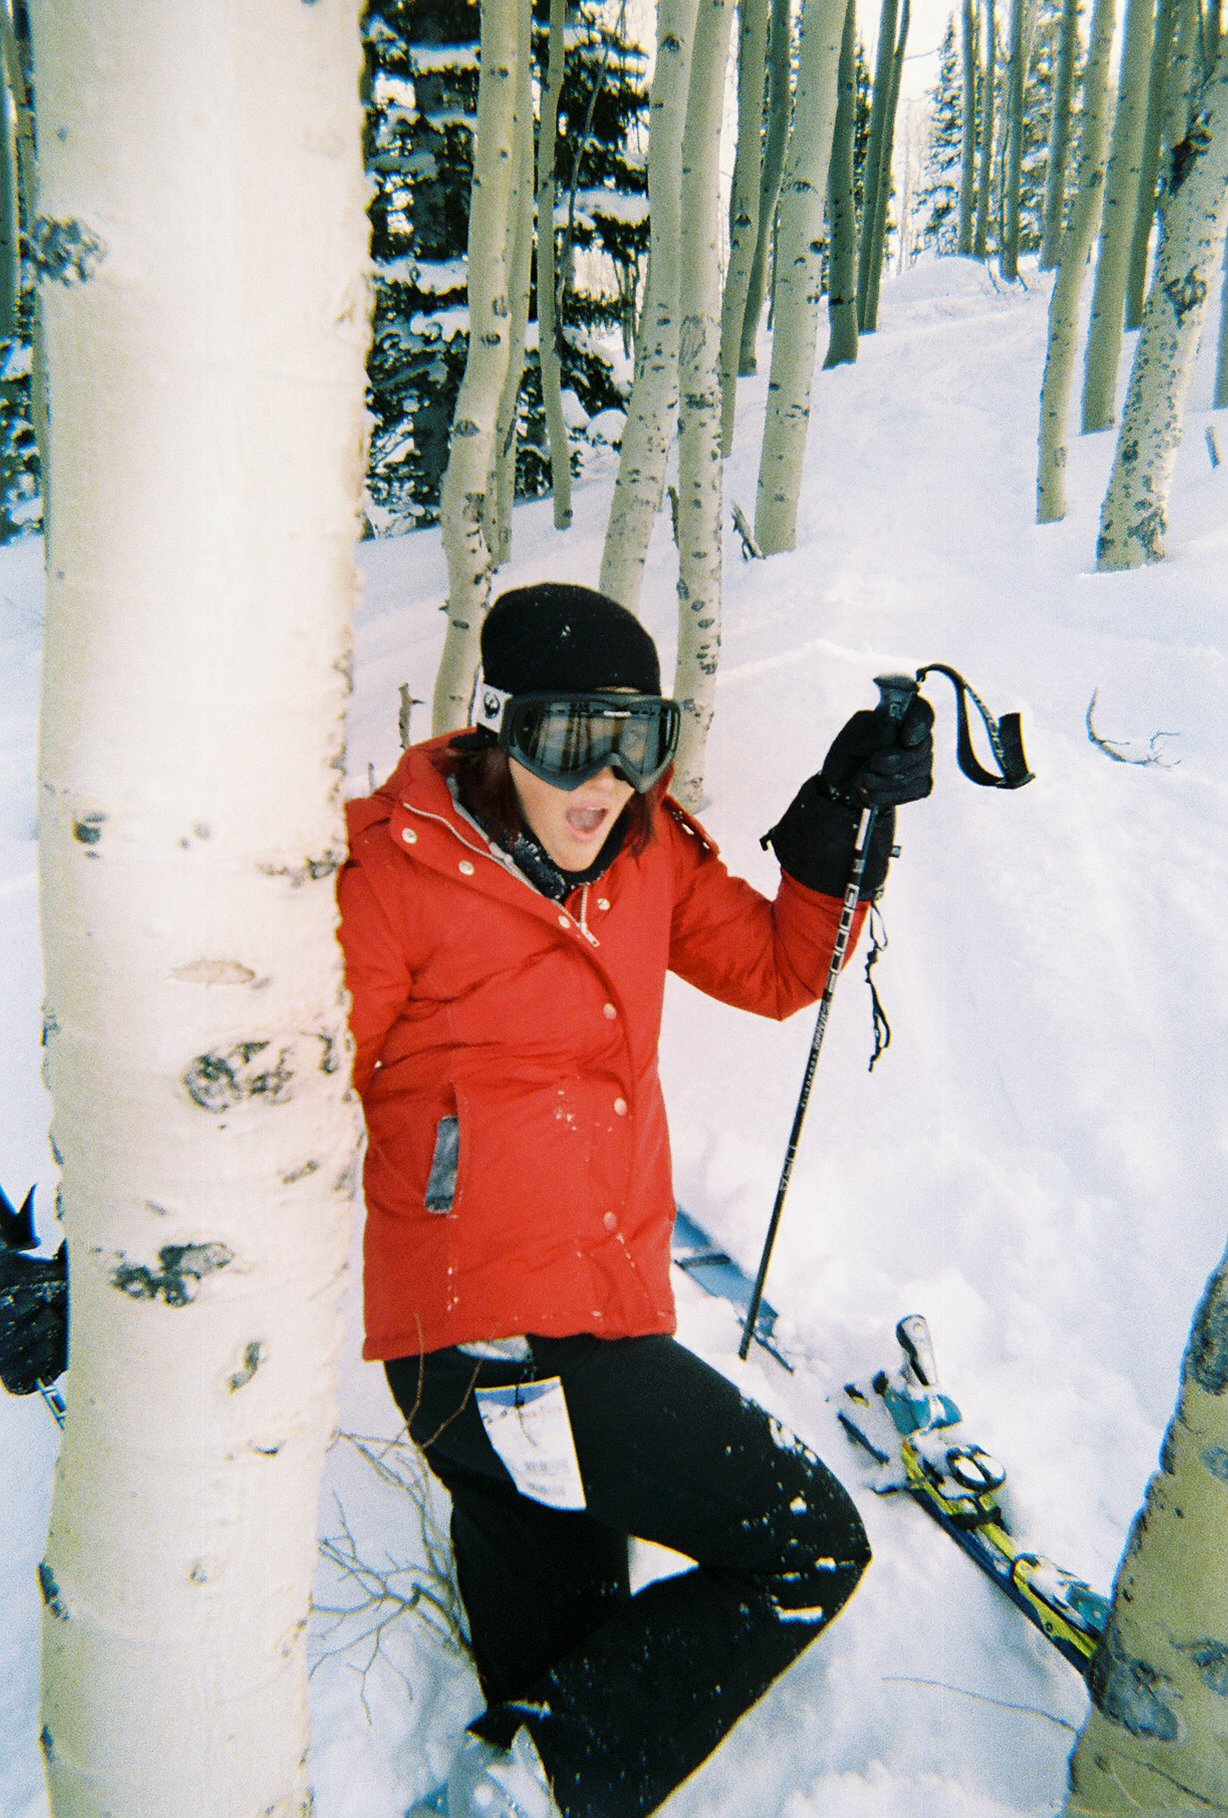 First day on skis, not so long ago